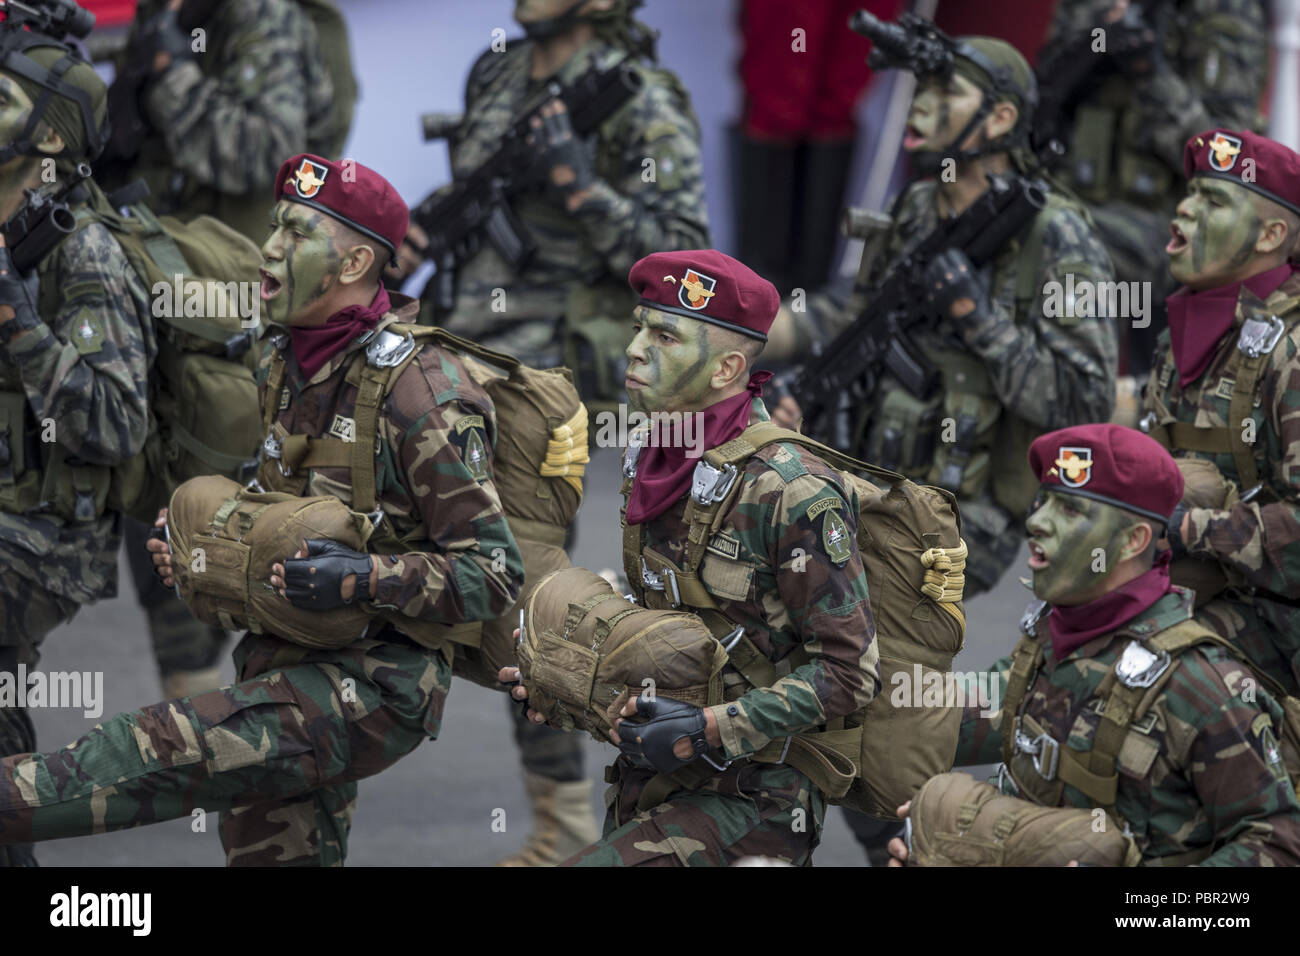 Lima, Lima, Peru. 29th July, 2018. Peruvian officers seen participating in the military parade.Members of Peru's armed forces, coastguard, search & rescue, and police march in full uniform during the country's Gran Parada Militar. This parade always occurs the day after Peru's Independence Day marking the official end of festivities across the nation. Credit: Guillermo Gutierrez/SOPA Images/ZUMA Wire/Alamy Live News Stock Photo